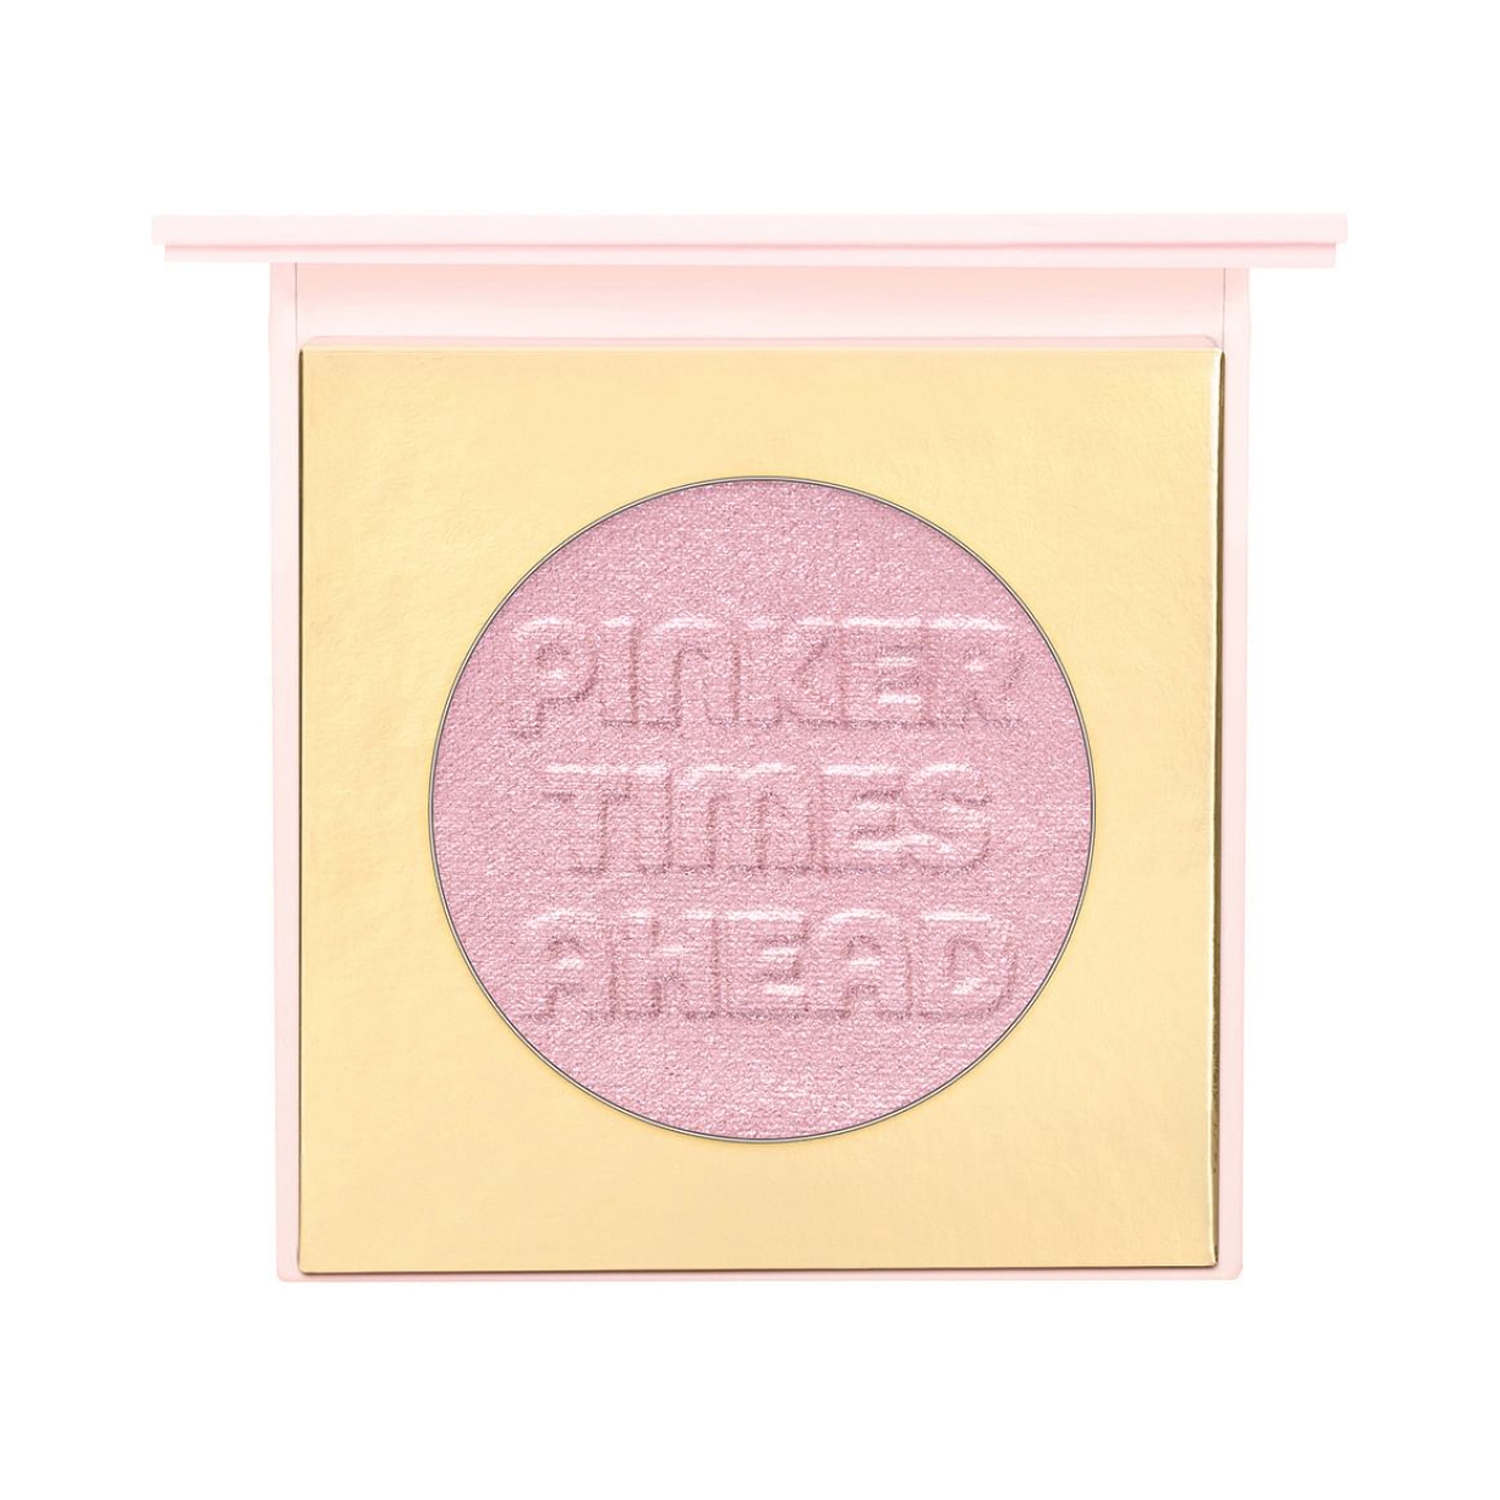 Too Faced | Too Faced Cheek Popper Blushing Highlighter - Pinker Times Ahead (3.4g)